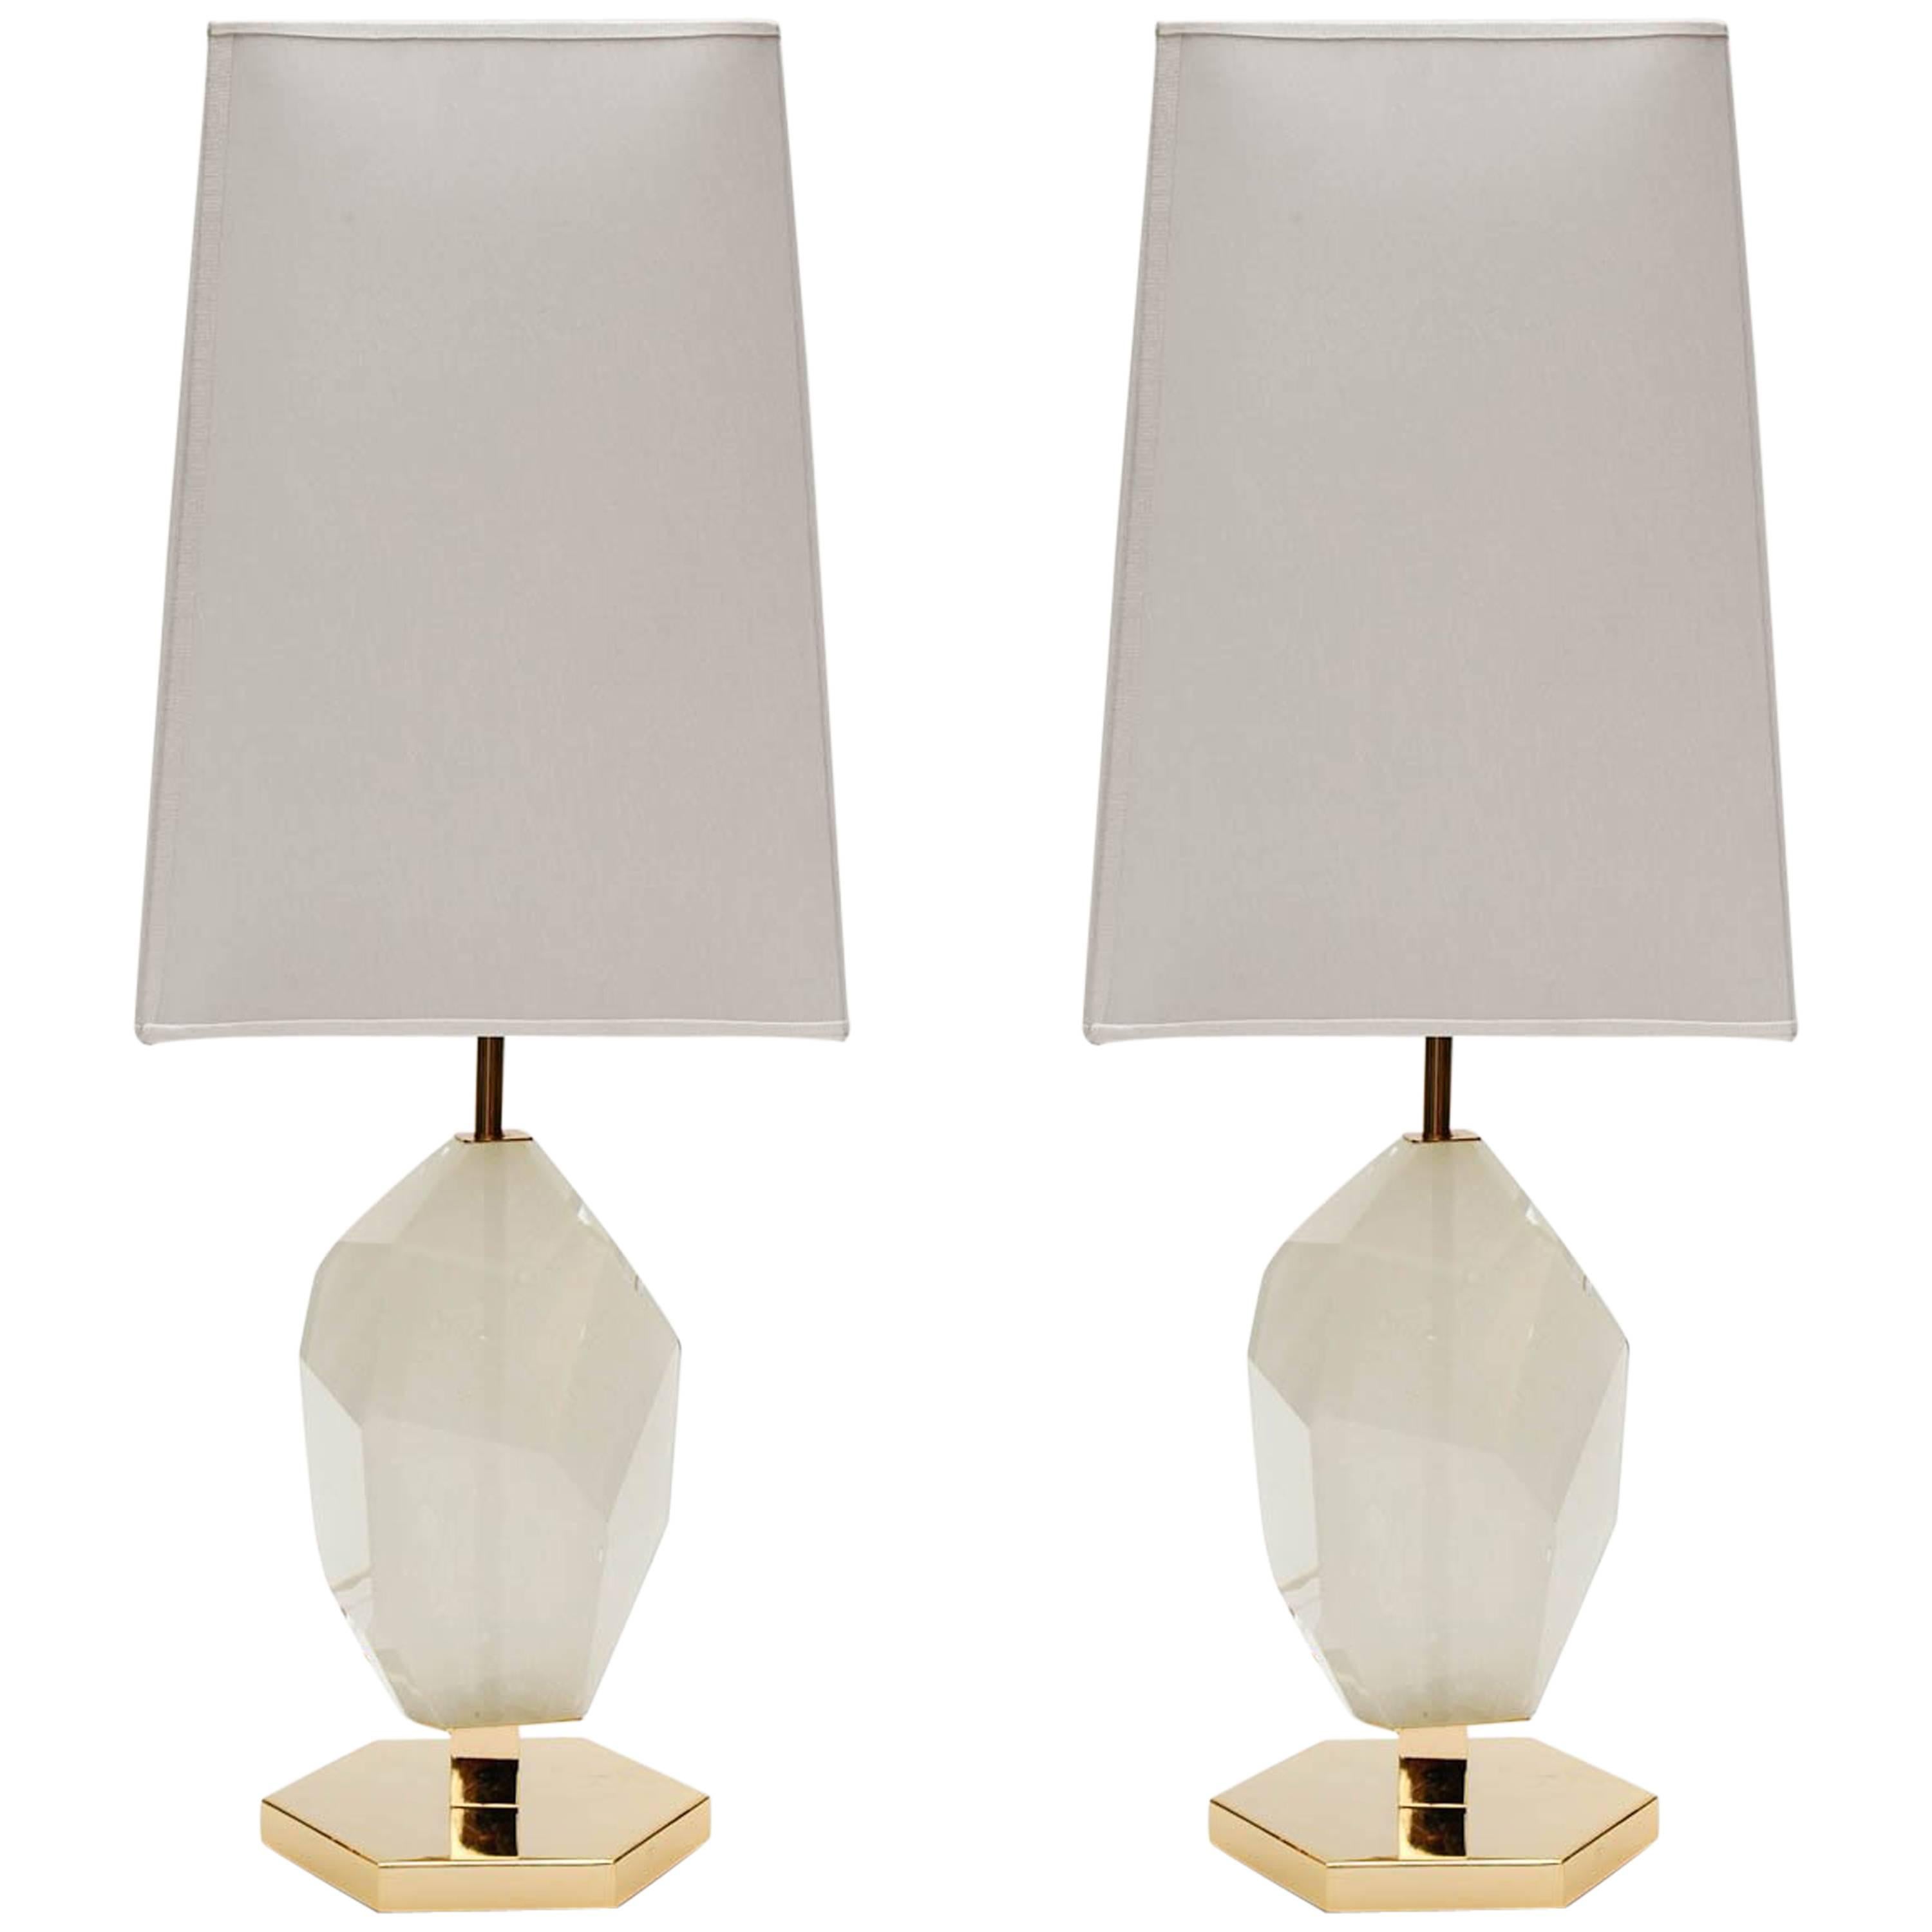 Pair of Brass and Diamond Cut Resin Table Lamps